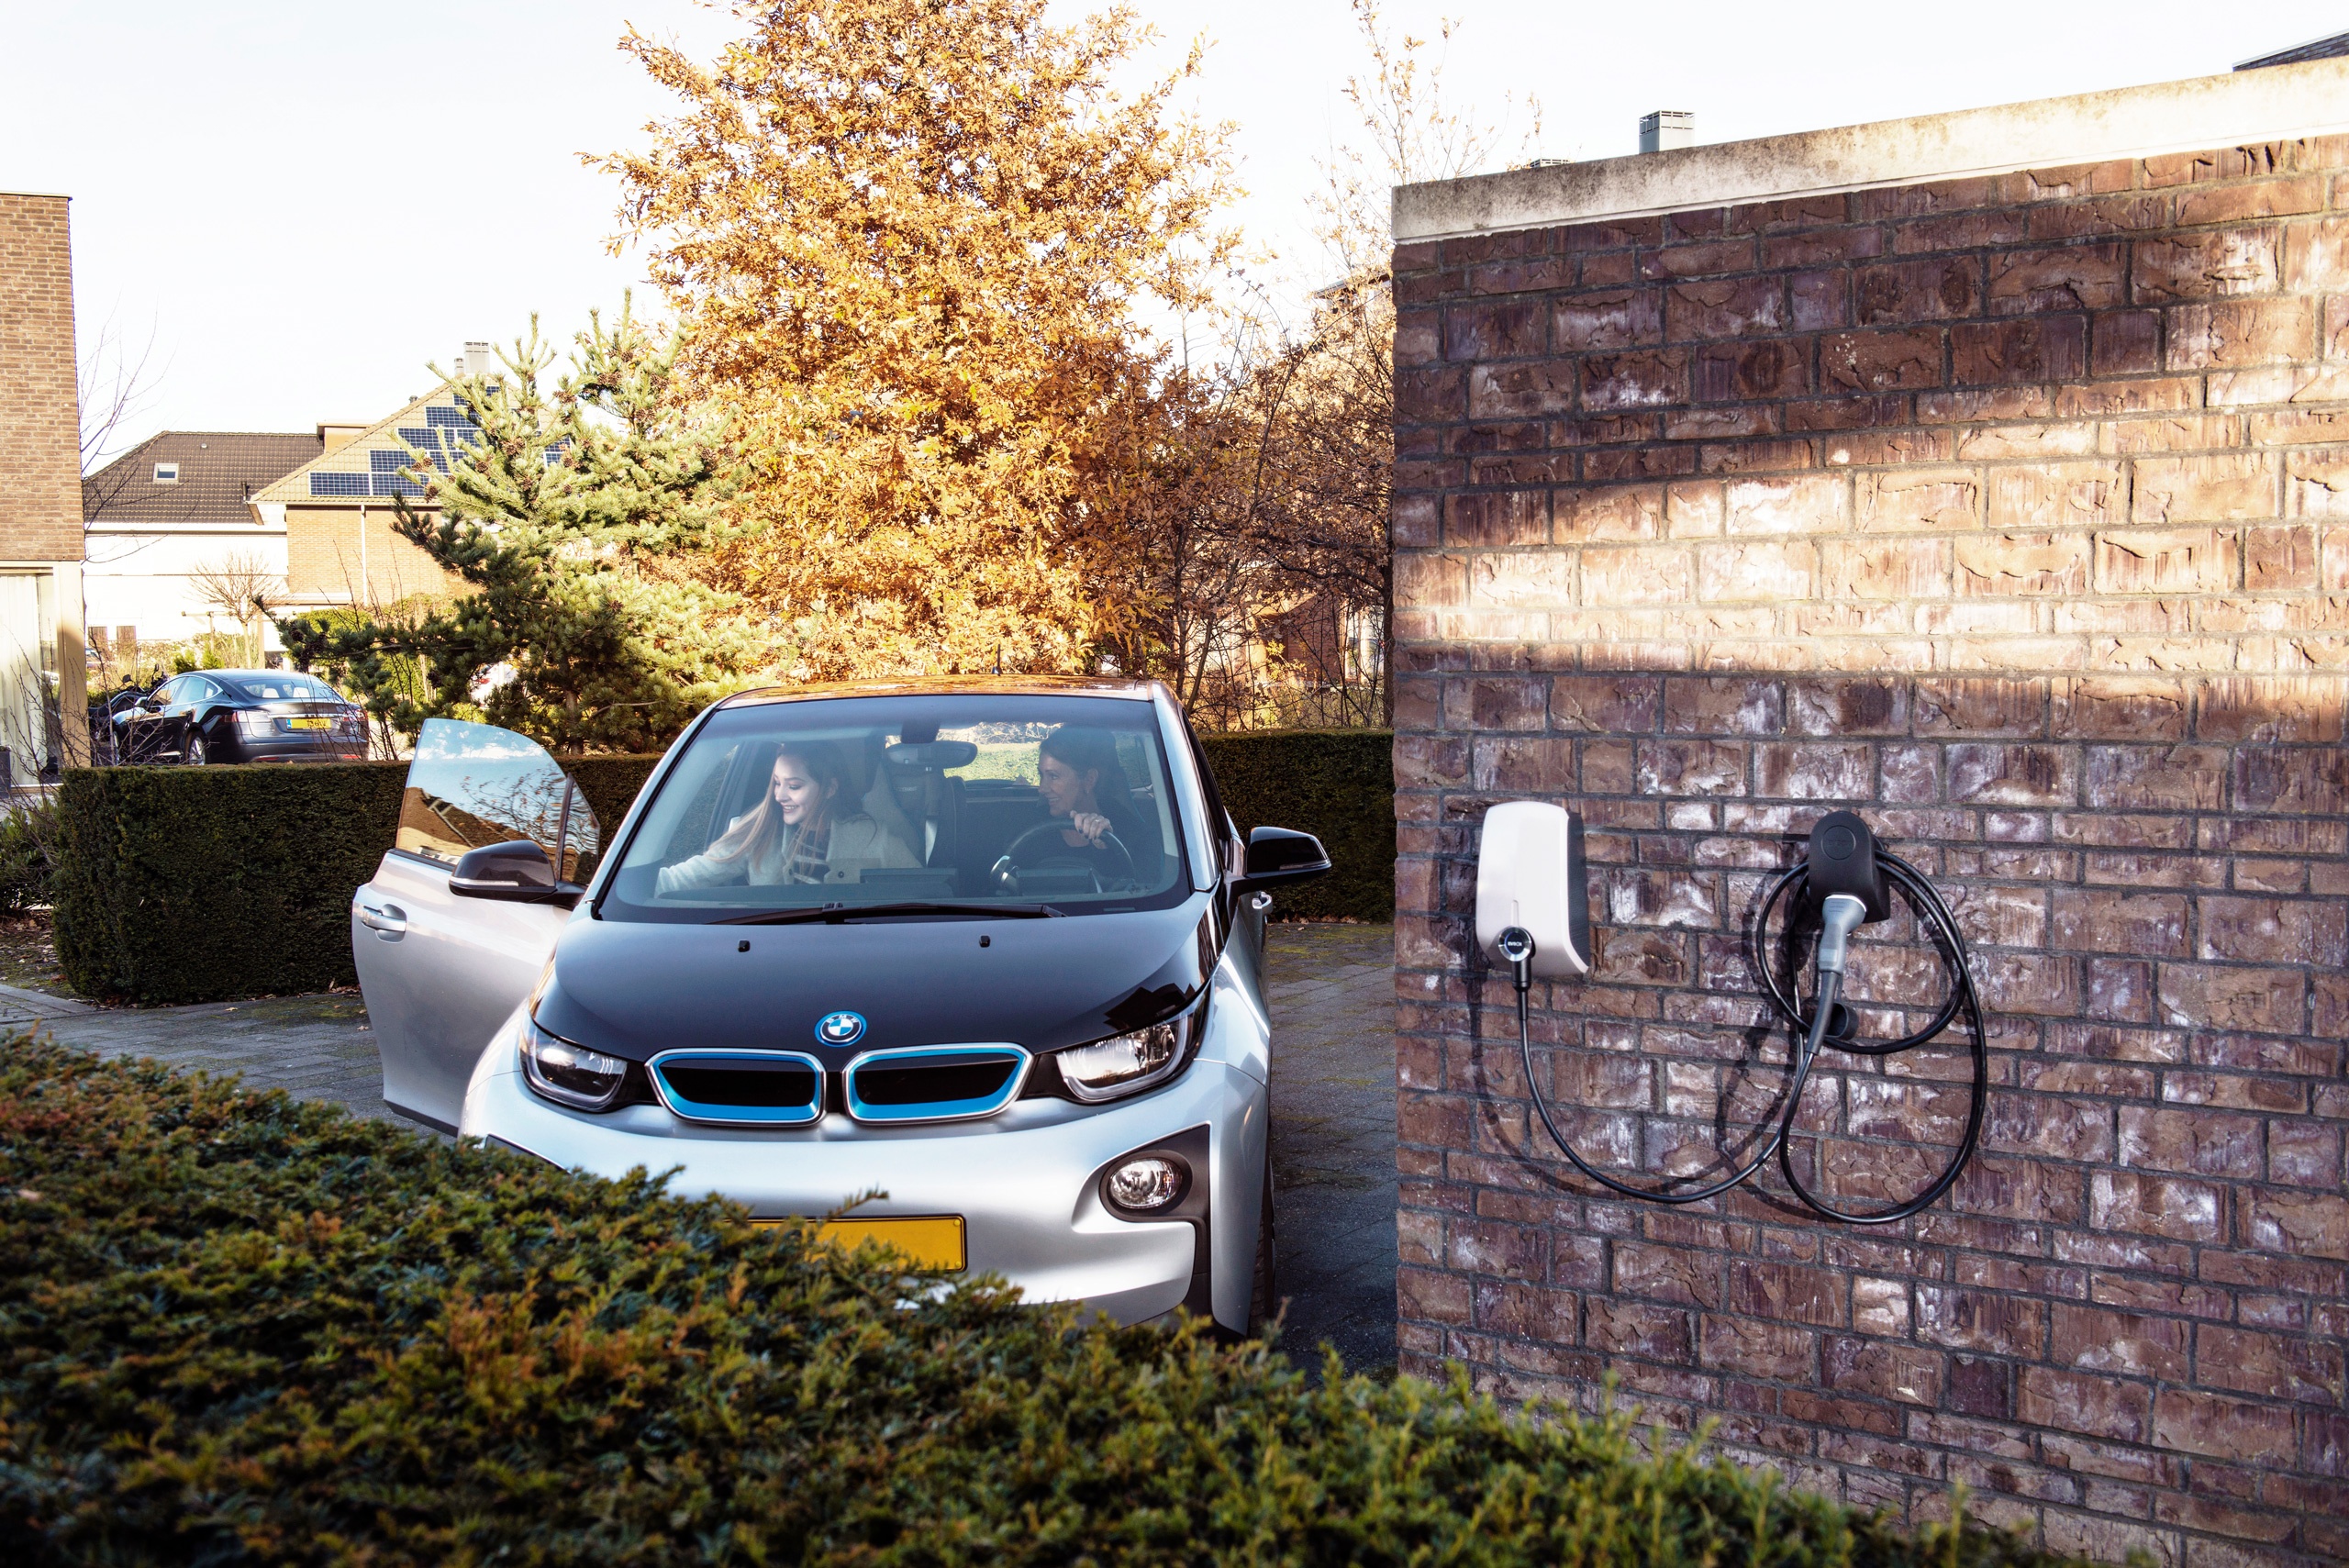 An electric BMW parking at a residential dwelling in the leafy suburbs next to a professionally installed EV charging station.